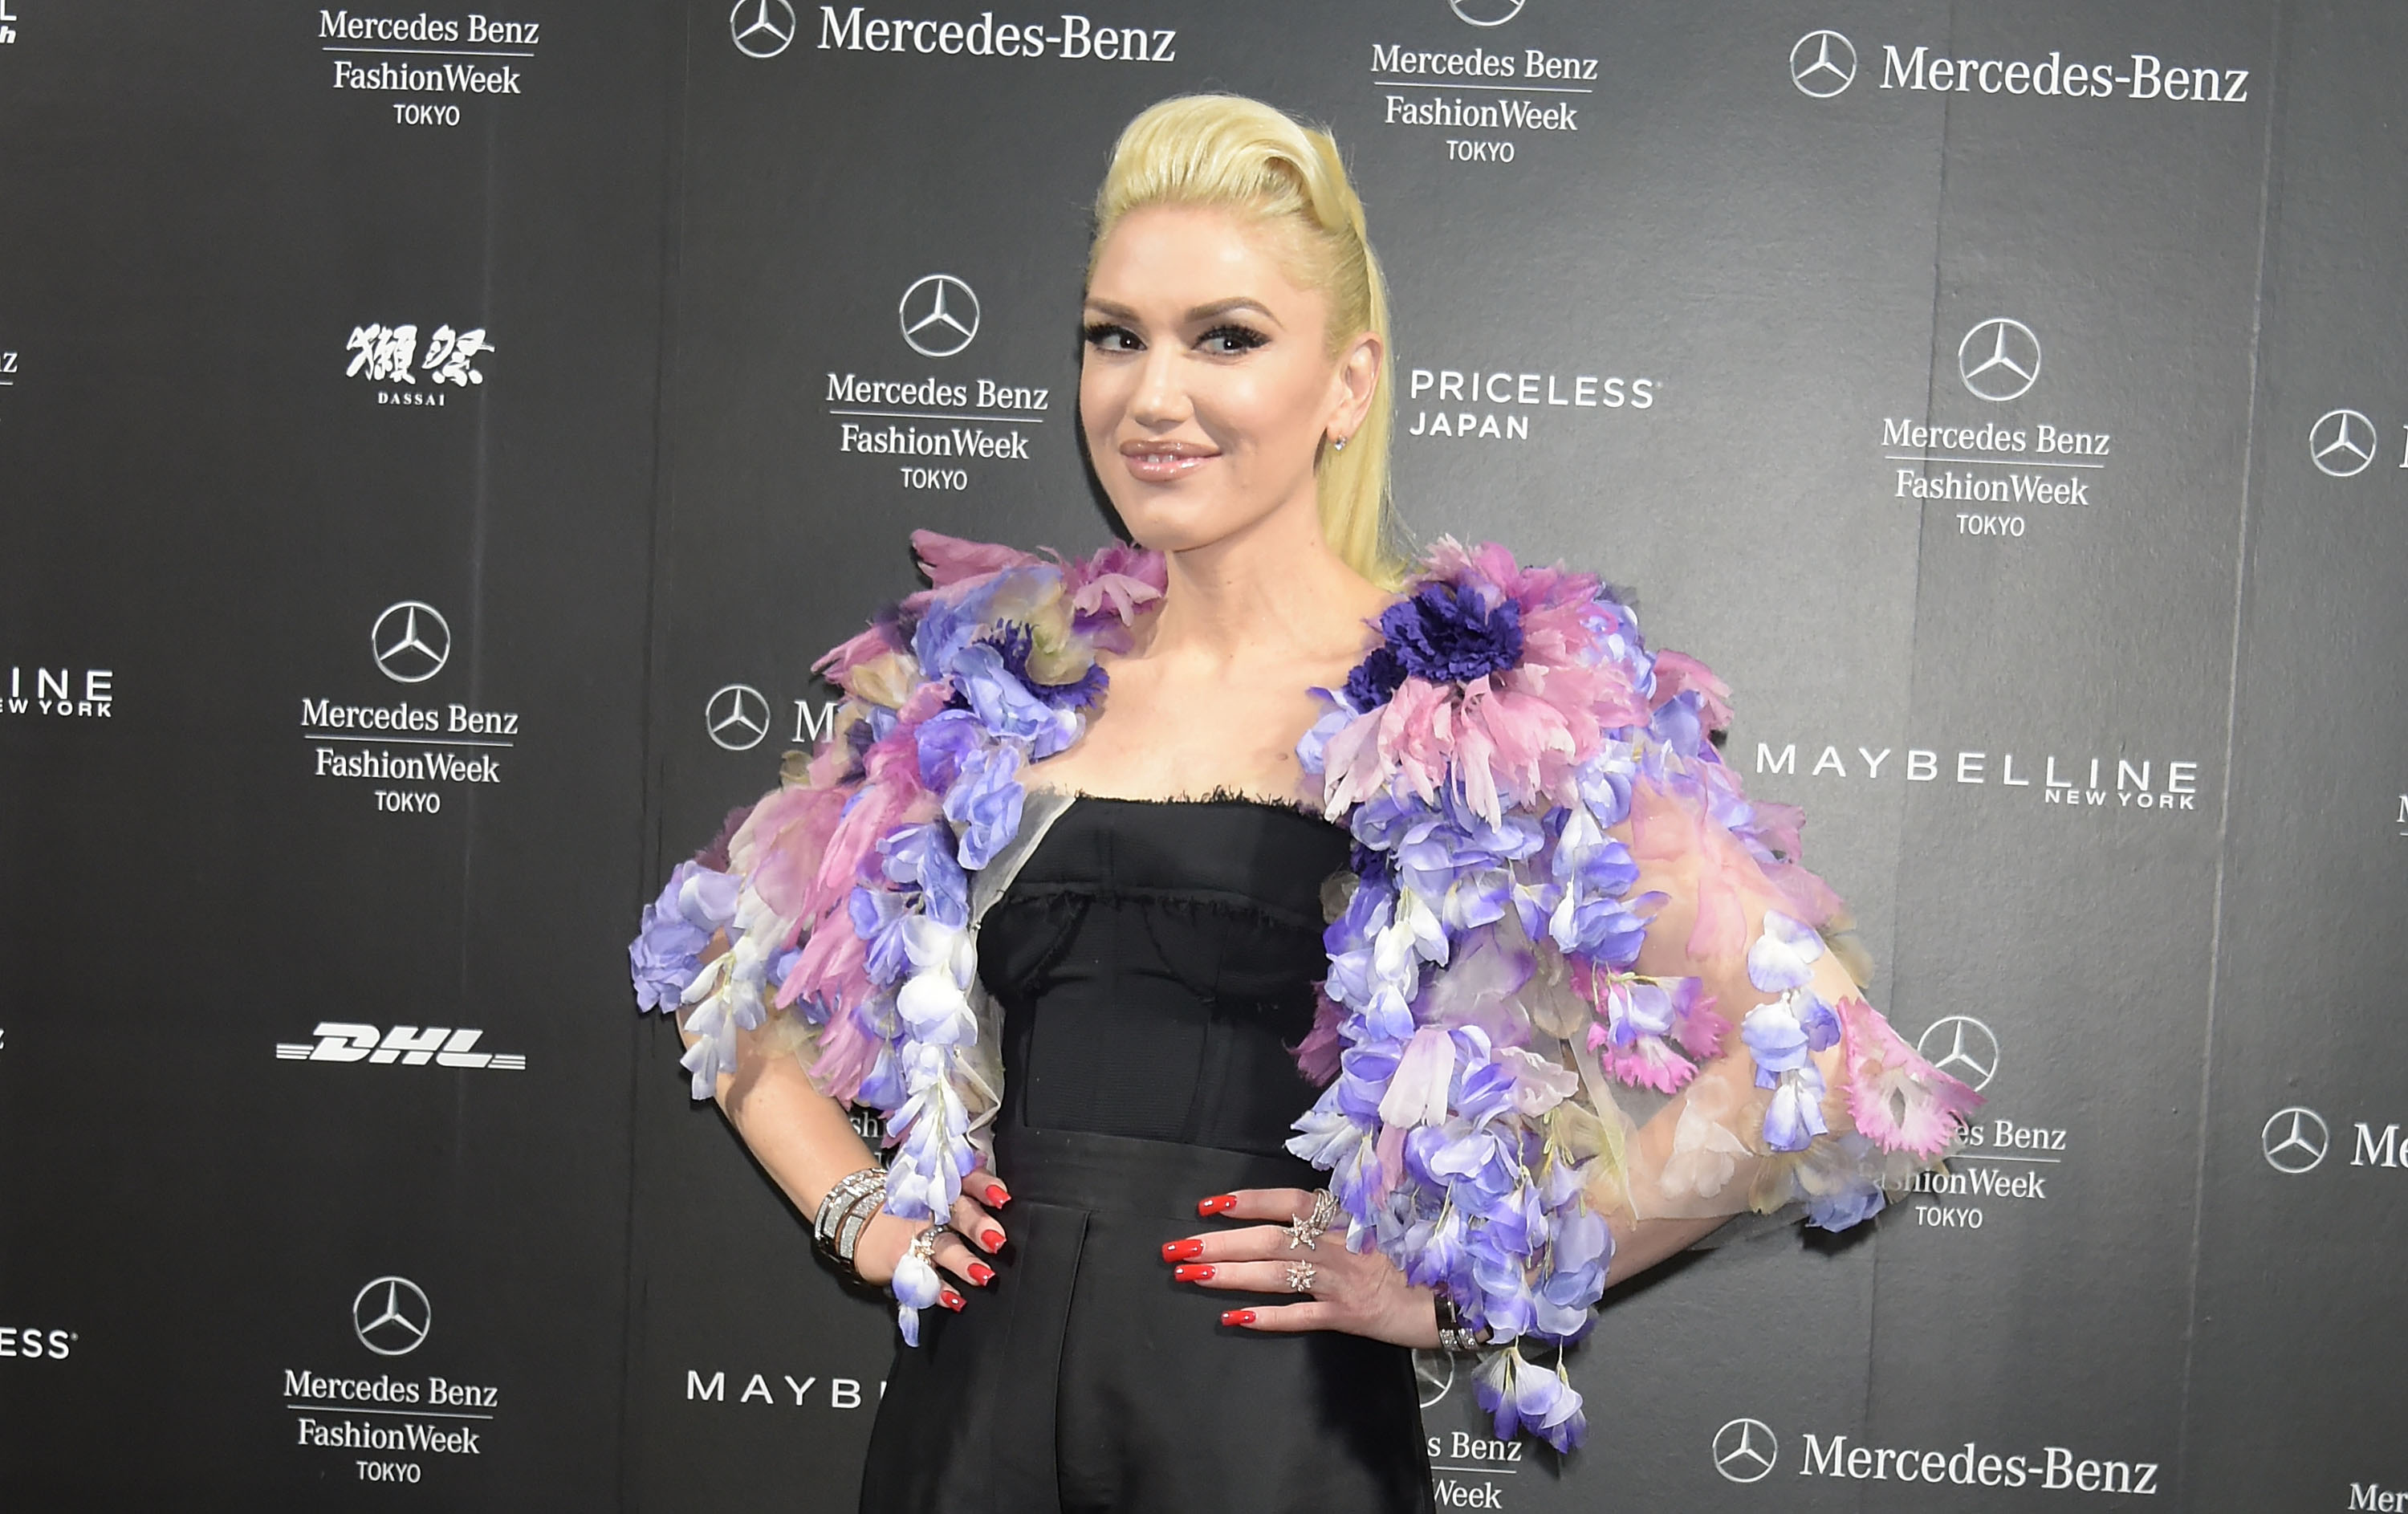 Gwen Stefani attends the photo call for the Keita Maruyama show as a part of Mercedes Benz Fashion Week Tokyo, March 14, 2016 in Tokyo, Japan (Jun Sato—WireImage/Getty Images)